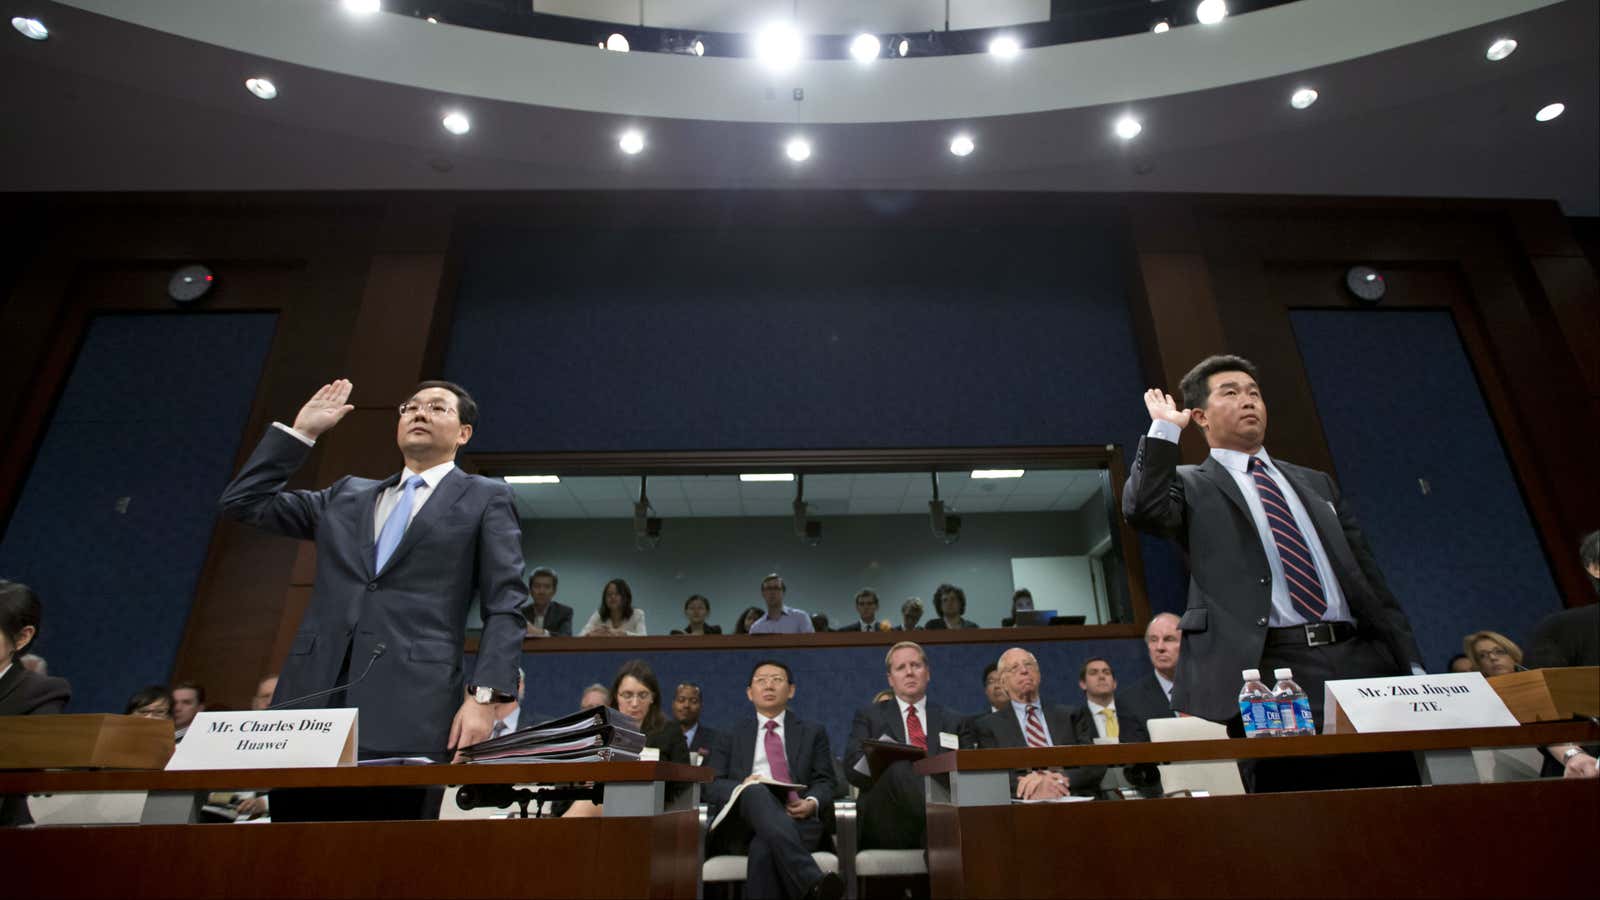 Charles Ding, Huawei Technologies Ltd senior vice president for the US, left, and Zhu Jinyun, ZTE Corporation senior vice president for North America and Europe before the House Intelligence Committee on Sept. 13, 2012